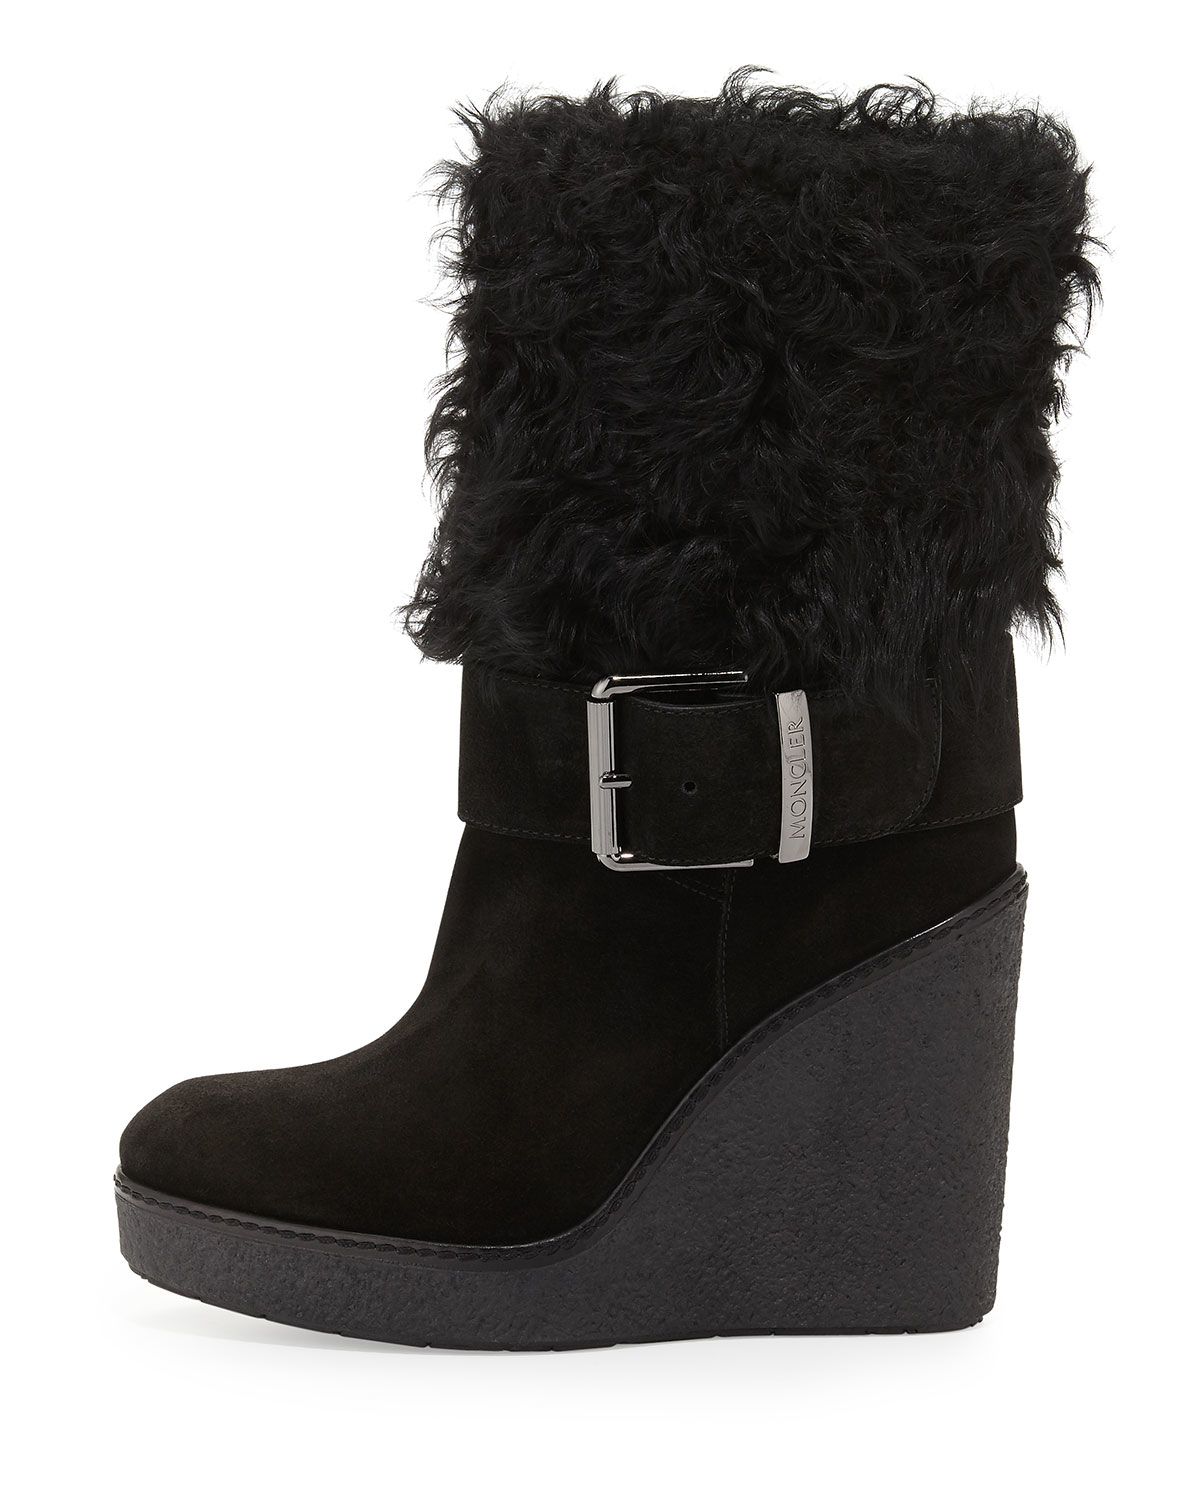 Lyst - Moncler Marguerite Fur-Cuff Wedge Boots in Black